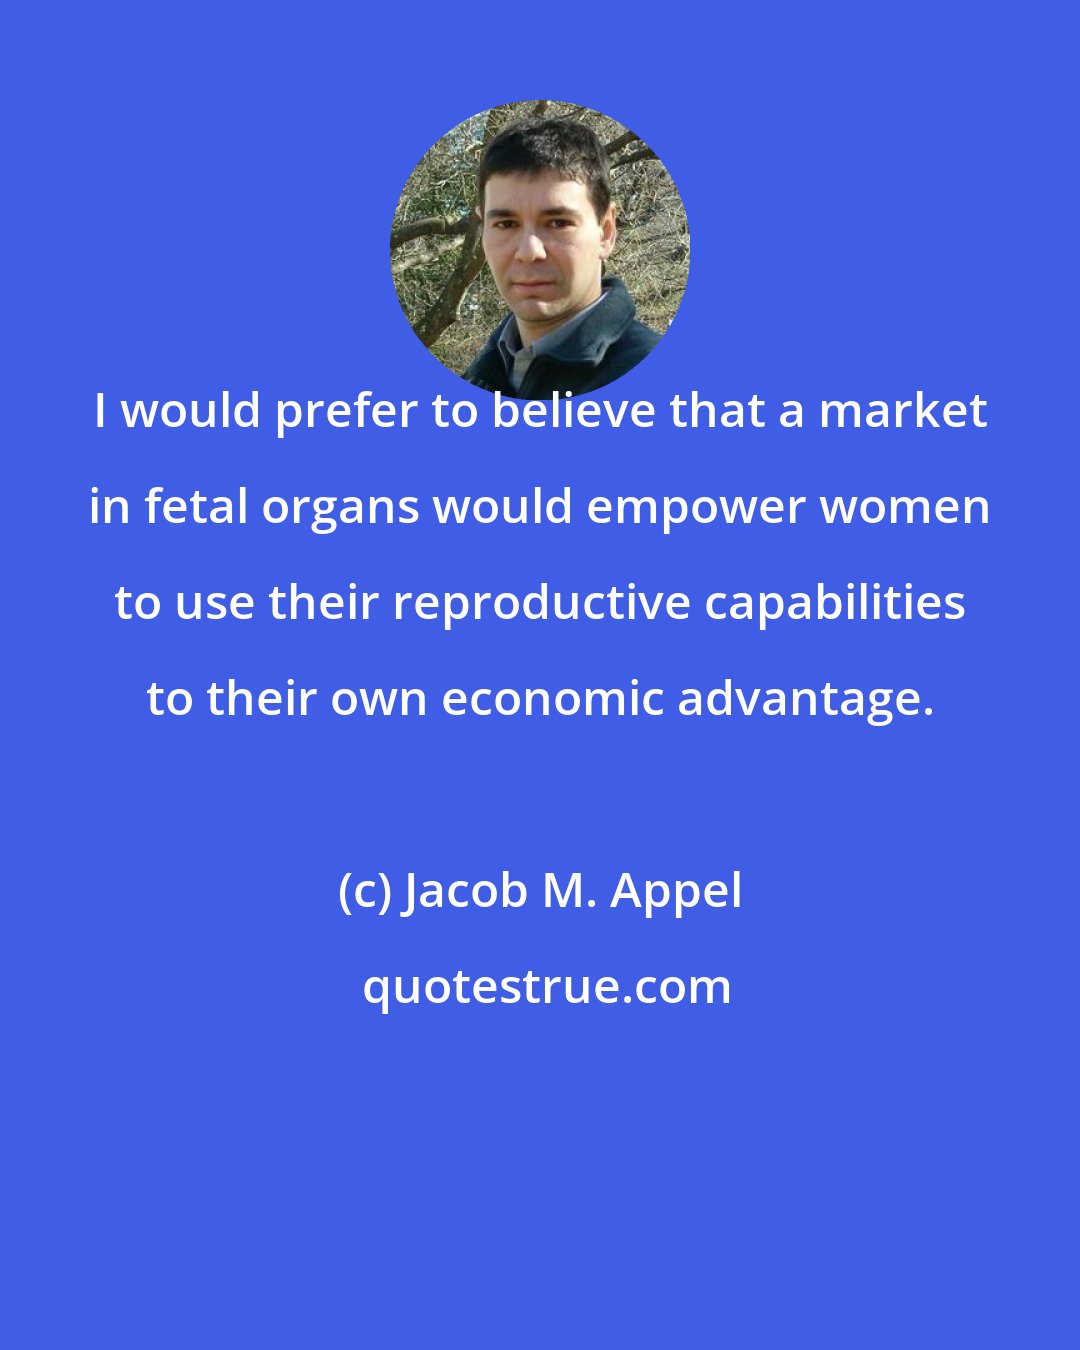 Jacob M. Appel: I would prefer to believe that a market in fetal organs would empower women to use their reproductive capabilities to their own economic advantage.